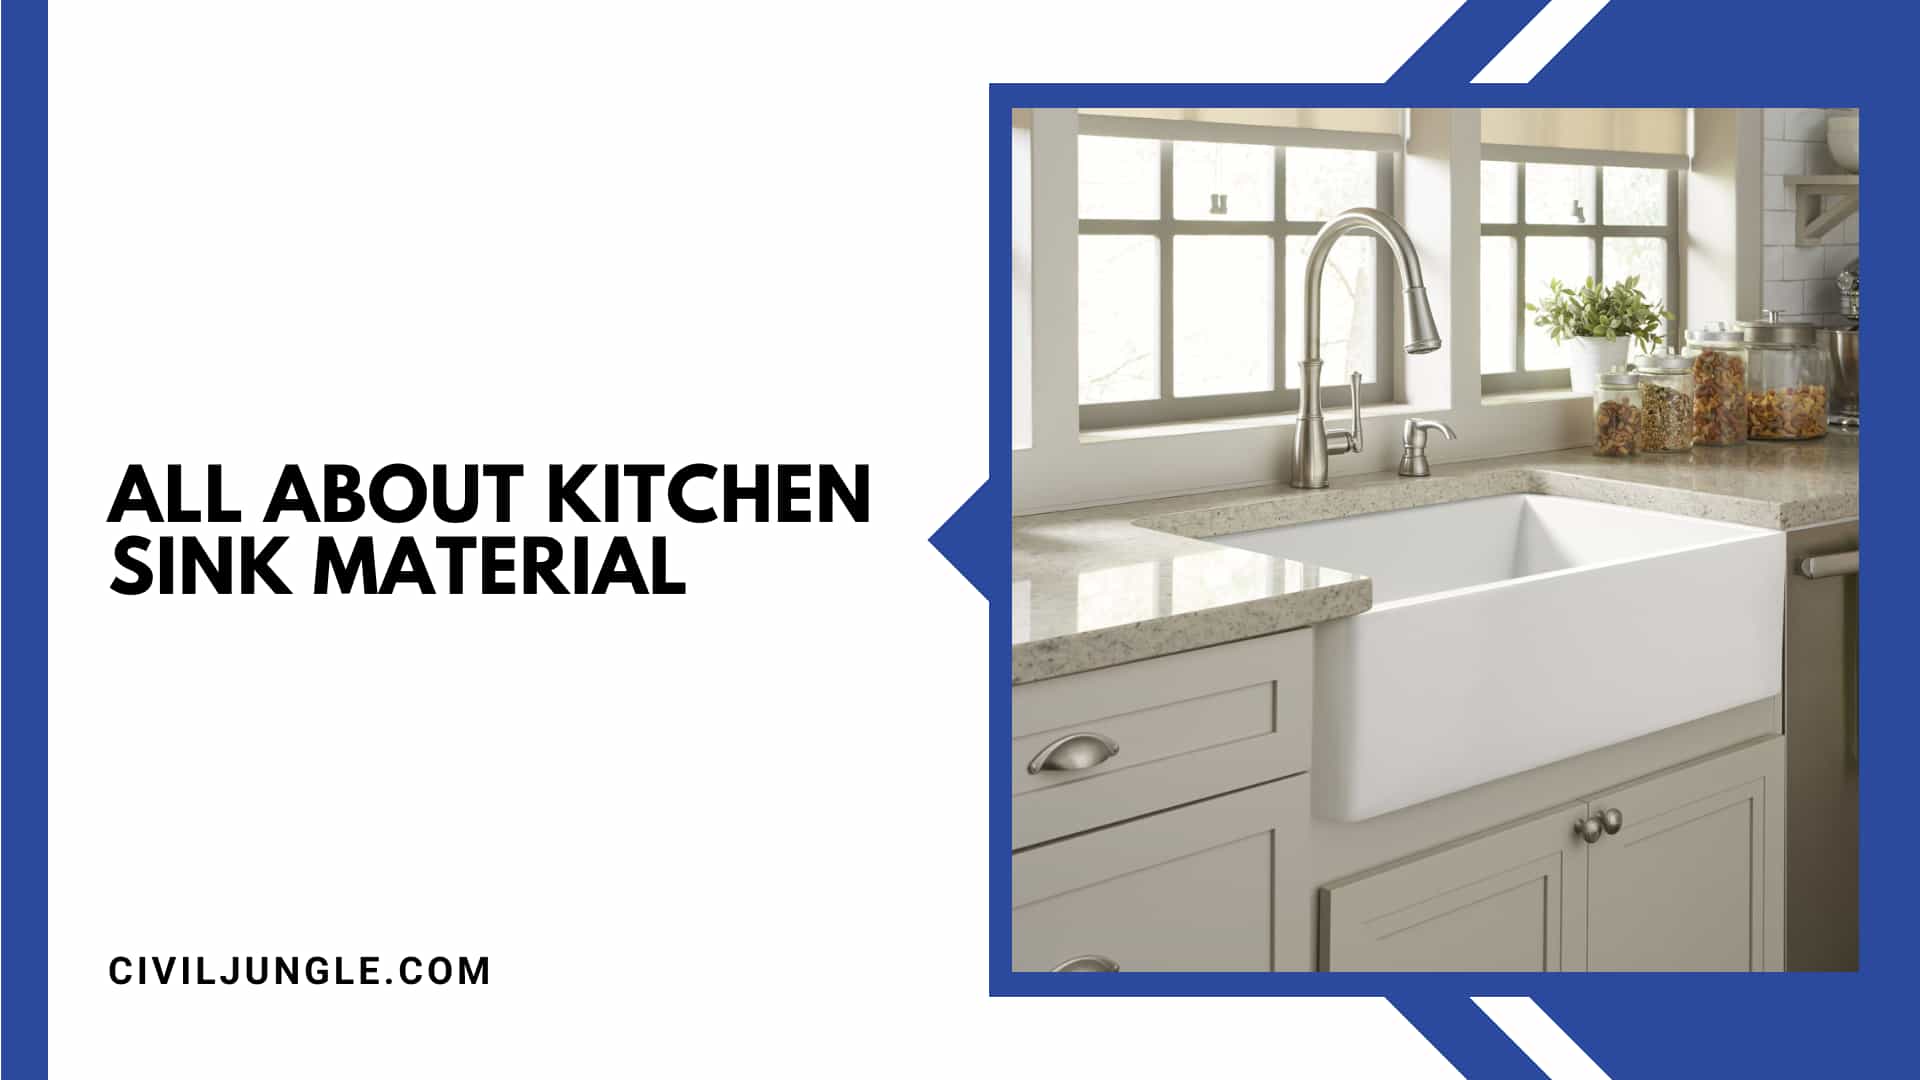 All About Kitchen Sink Material